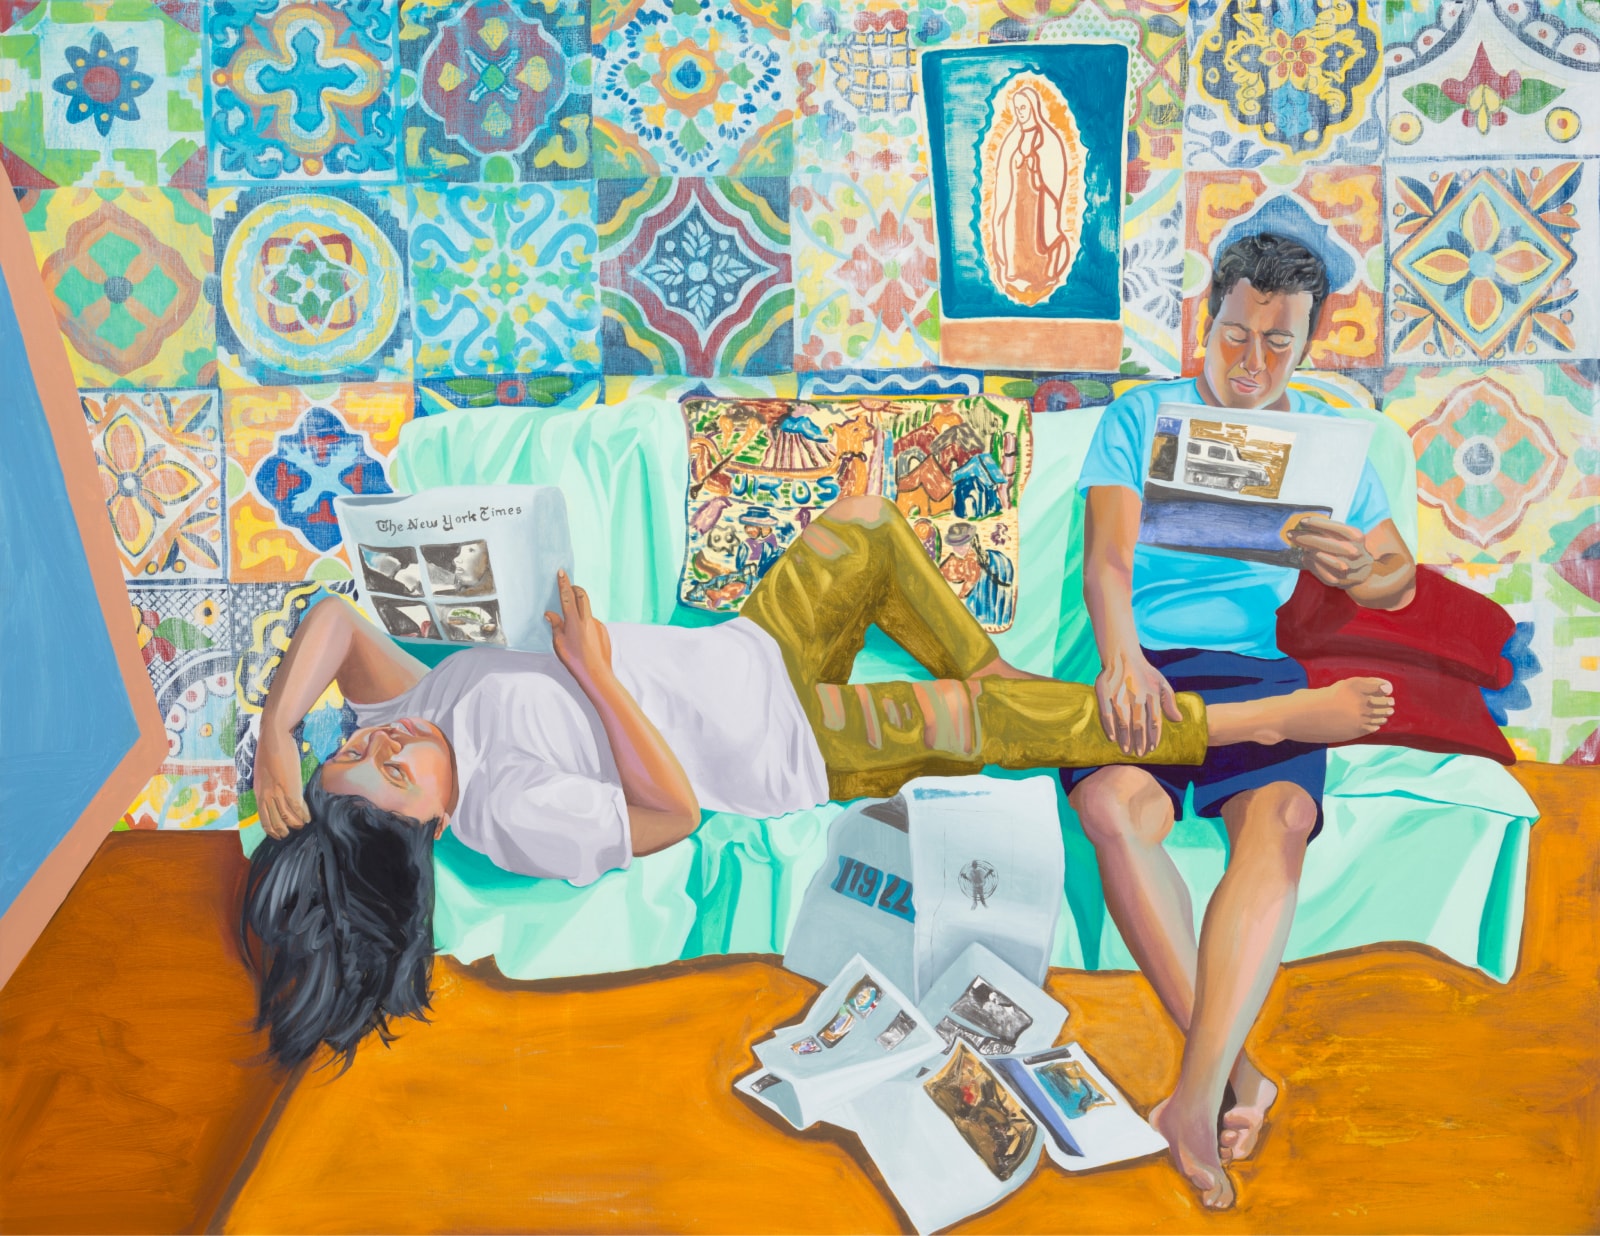 Nisenbaum’s “Las Talaveritas” with a woman lying on a couch with her feet in a man’s lap, each reading the newspaper